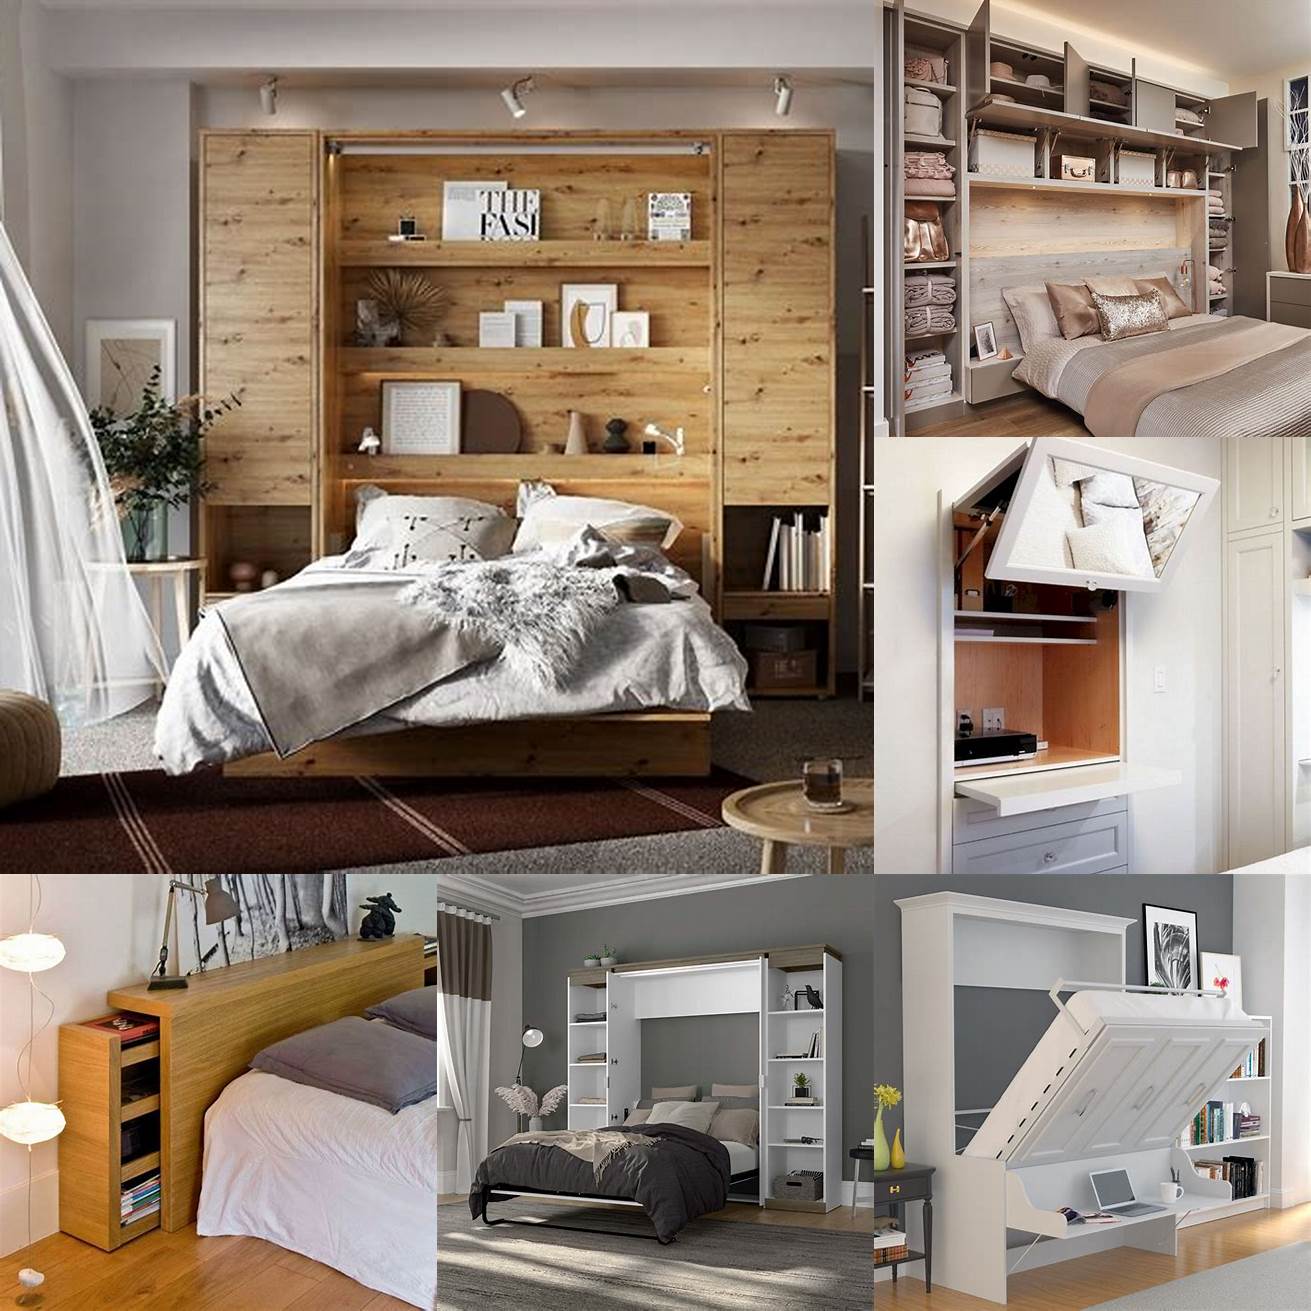 A hidden bed with storage shelves